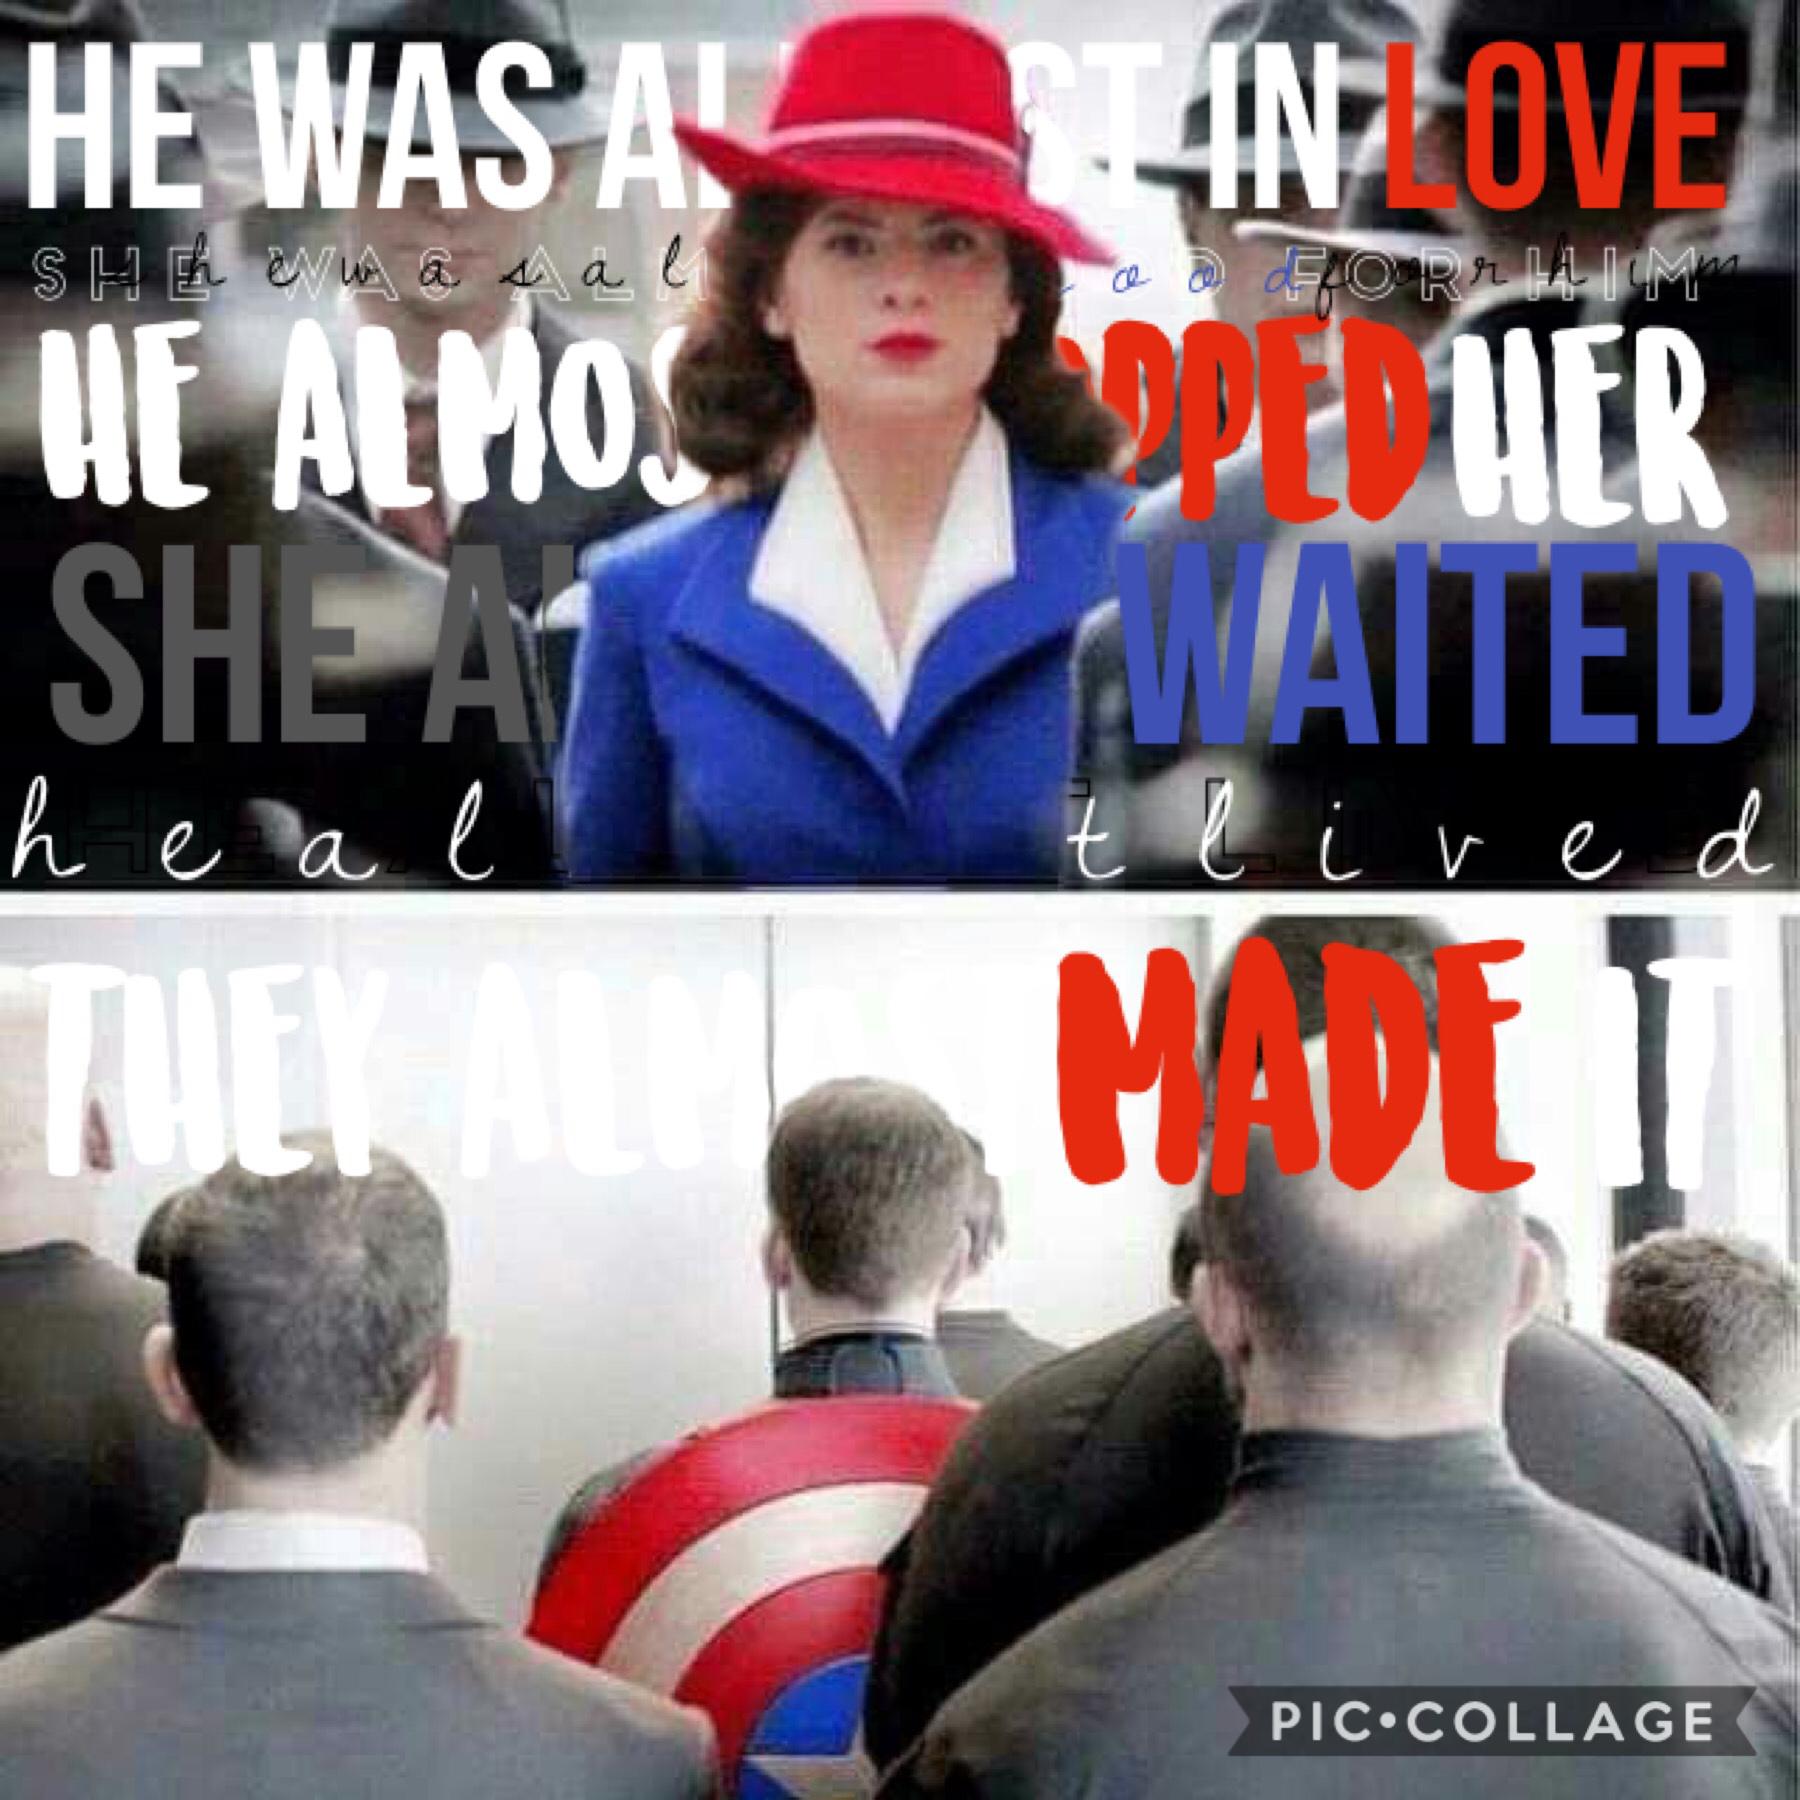 ❤️tap💙
He was almost in love 
She was almost good for him 
He almost stopped her 
She almost waited 
He almost lived 
They almost made it 